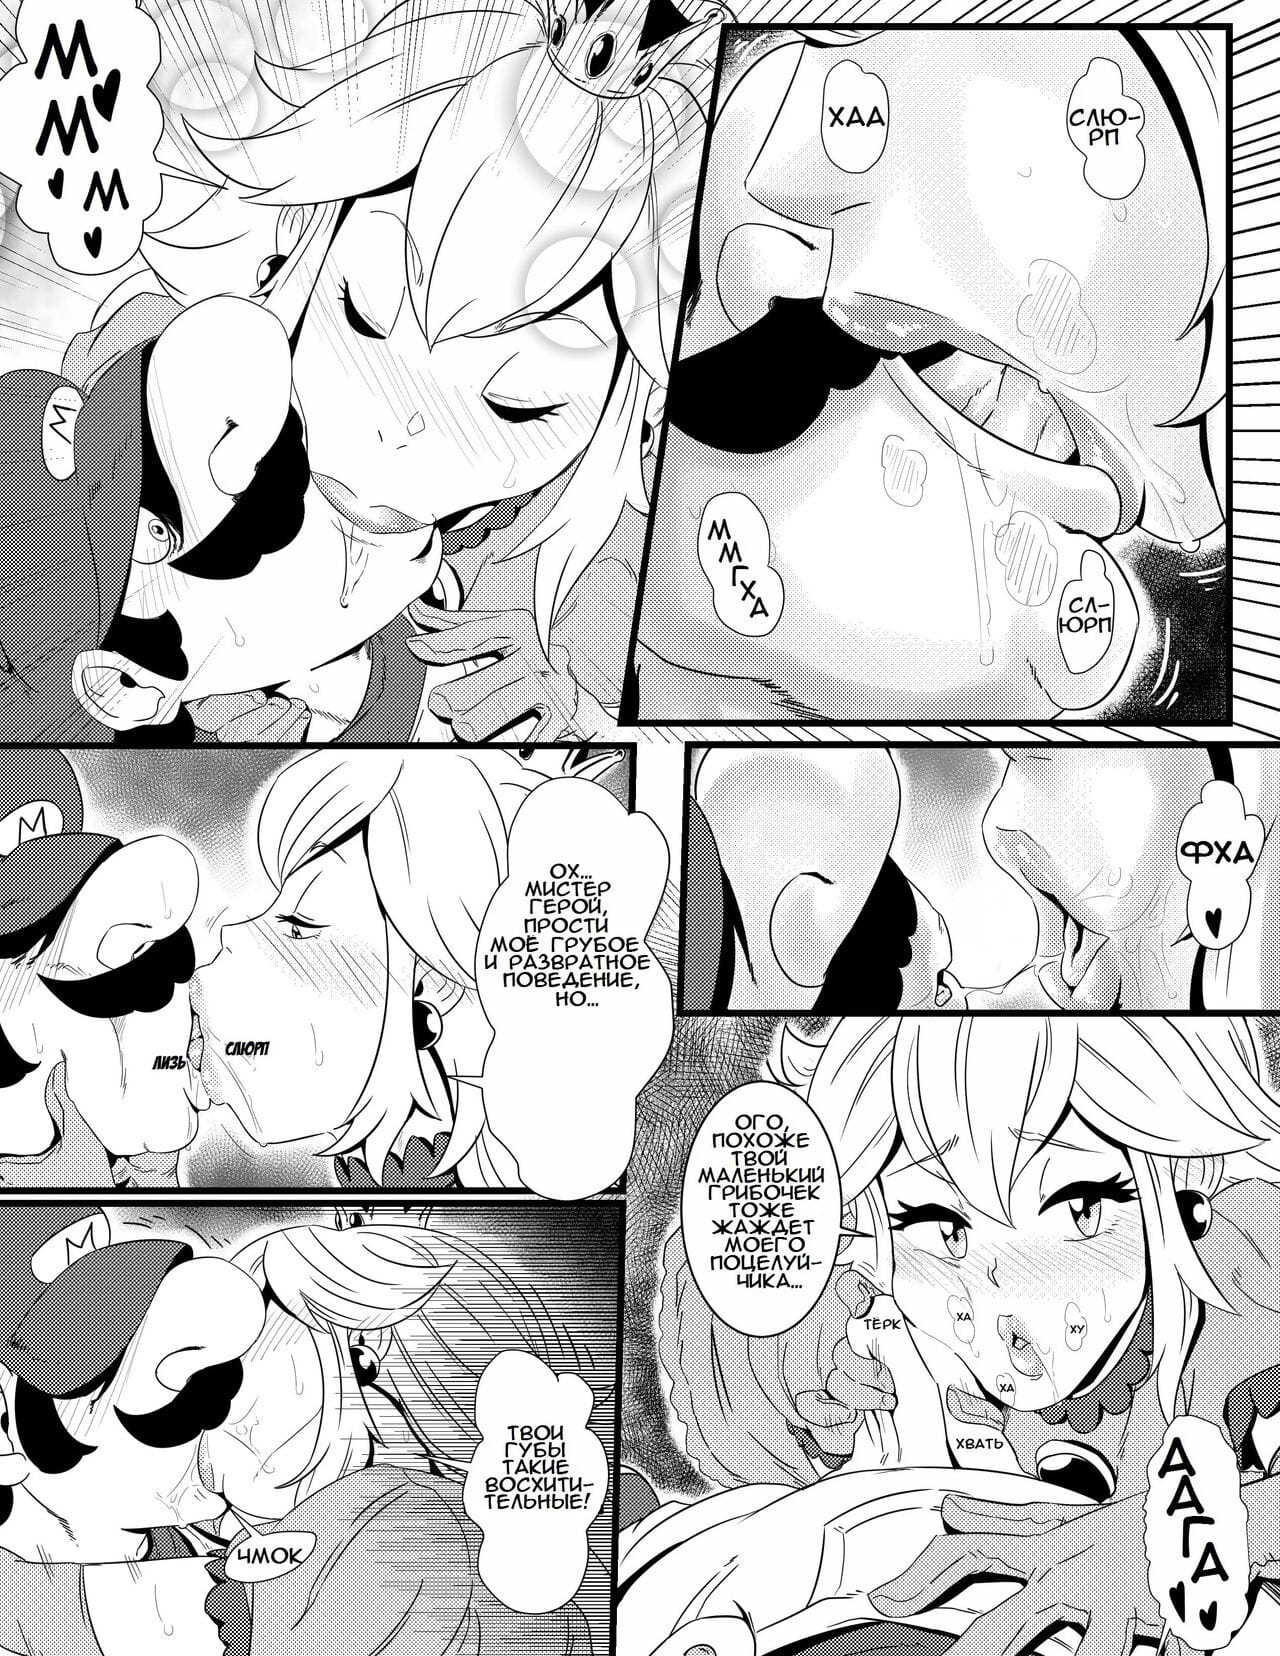 Peachy Lips page 1